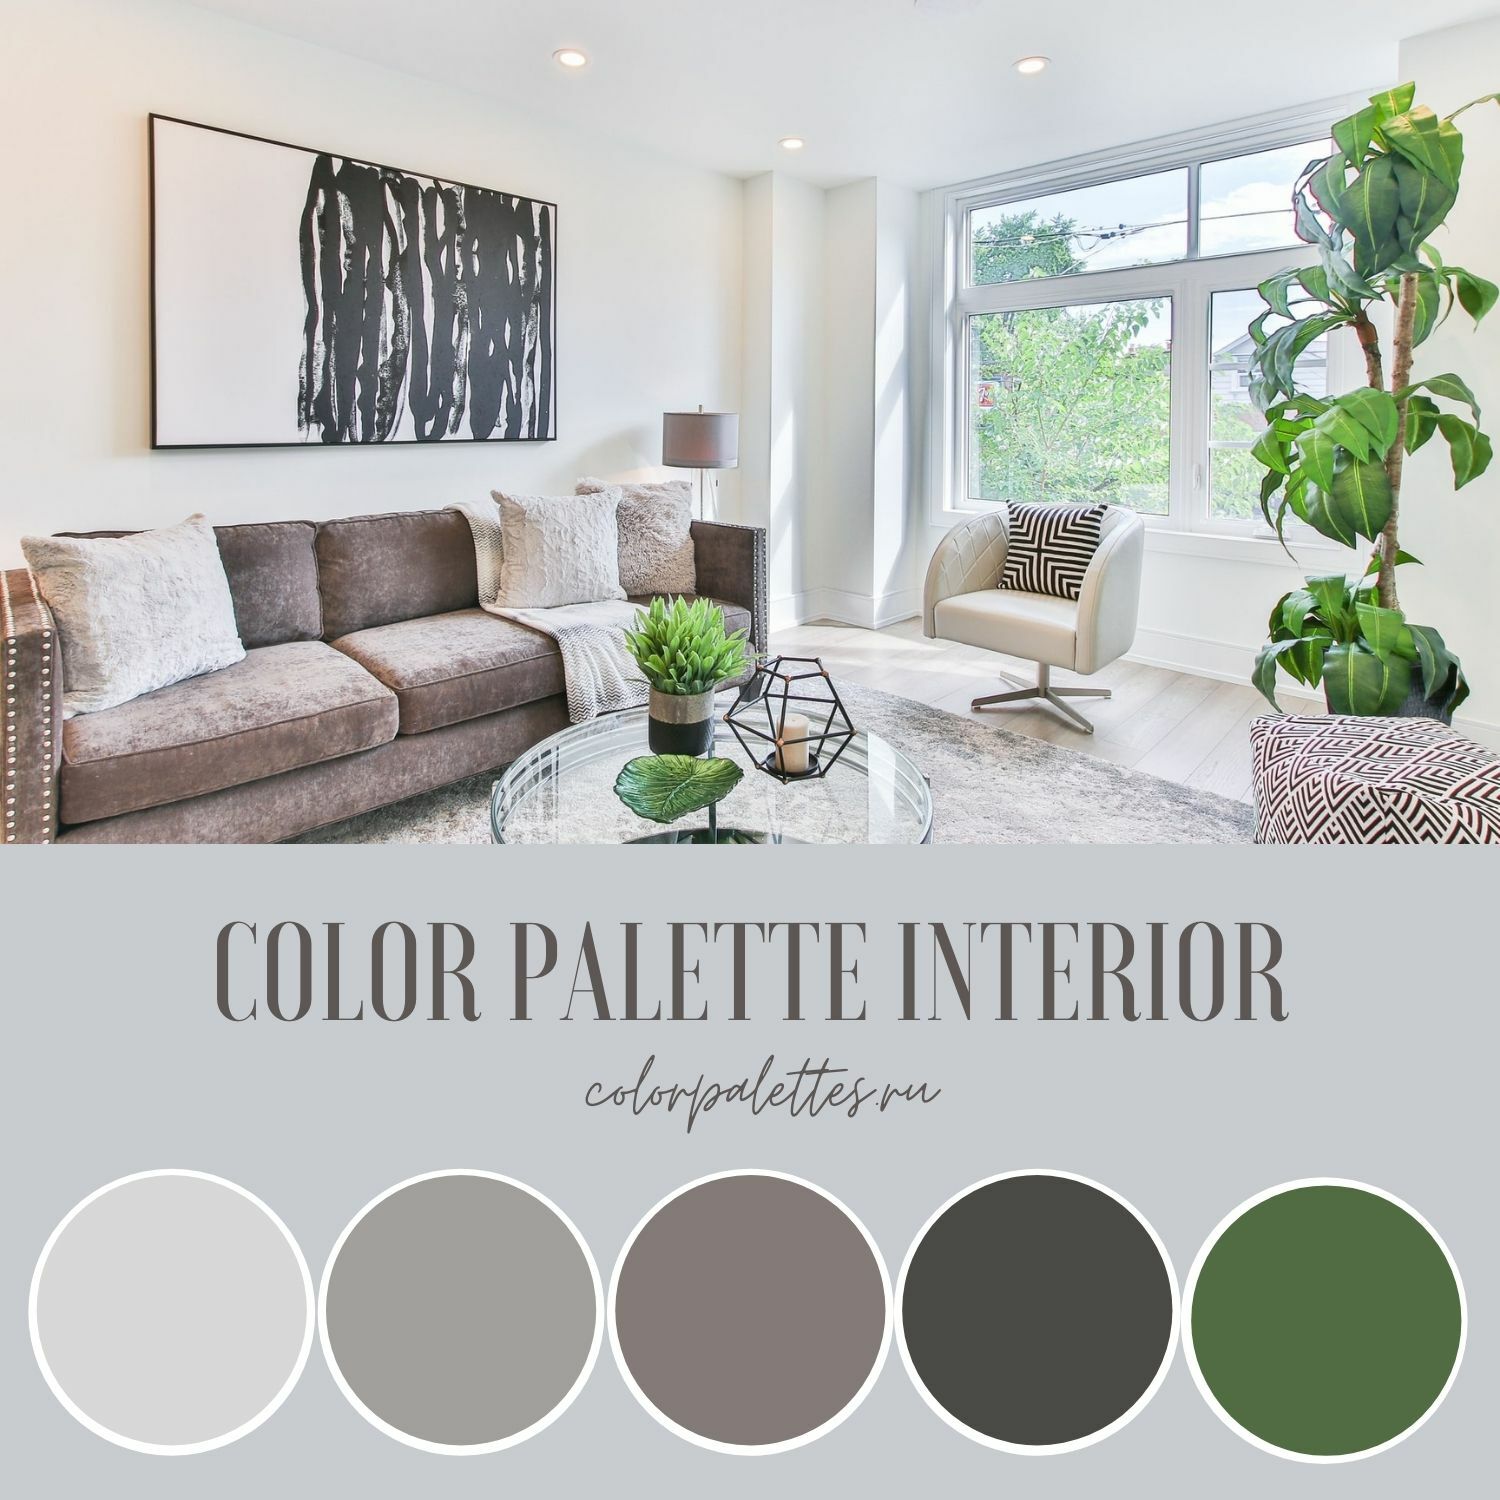 Gray palette in the interior of the living room